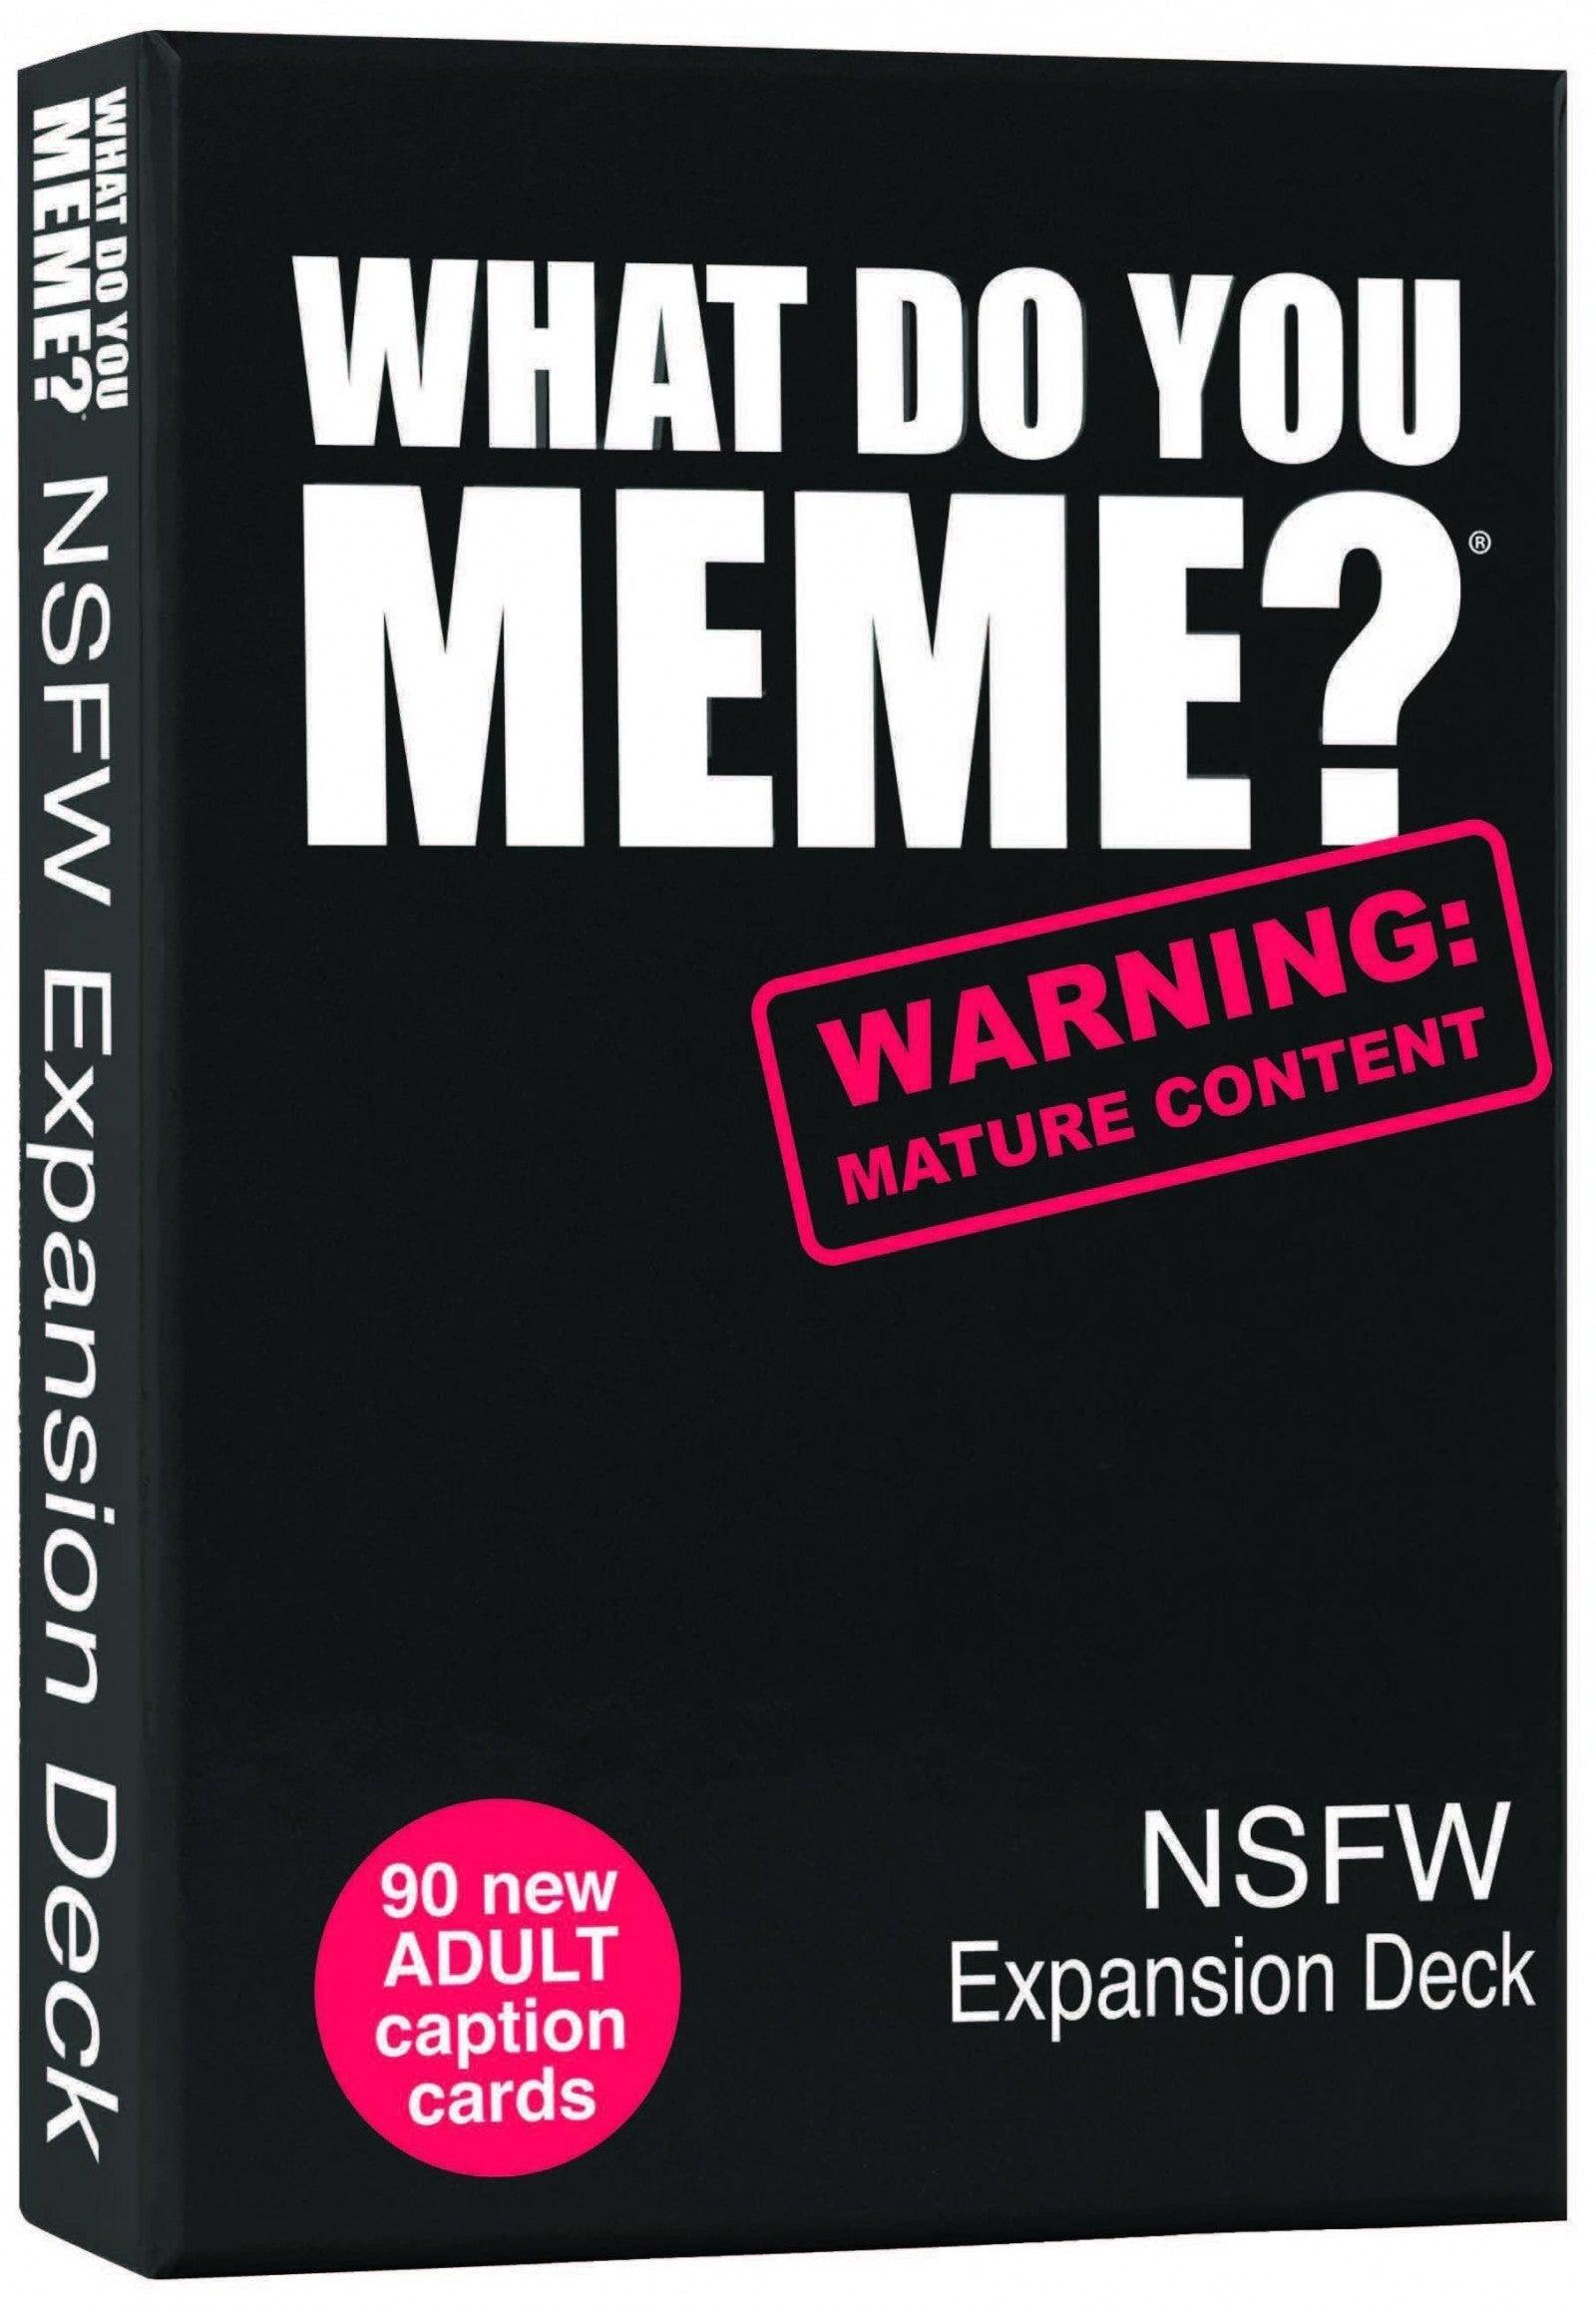 VR-68831 What Do You Meme? NSFW Expansion Deck (Do not sell on online marketplaces) - What Do You Meme - Titan Pop Culture